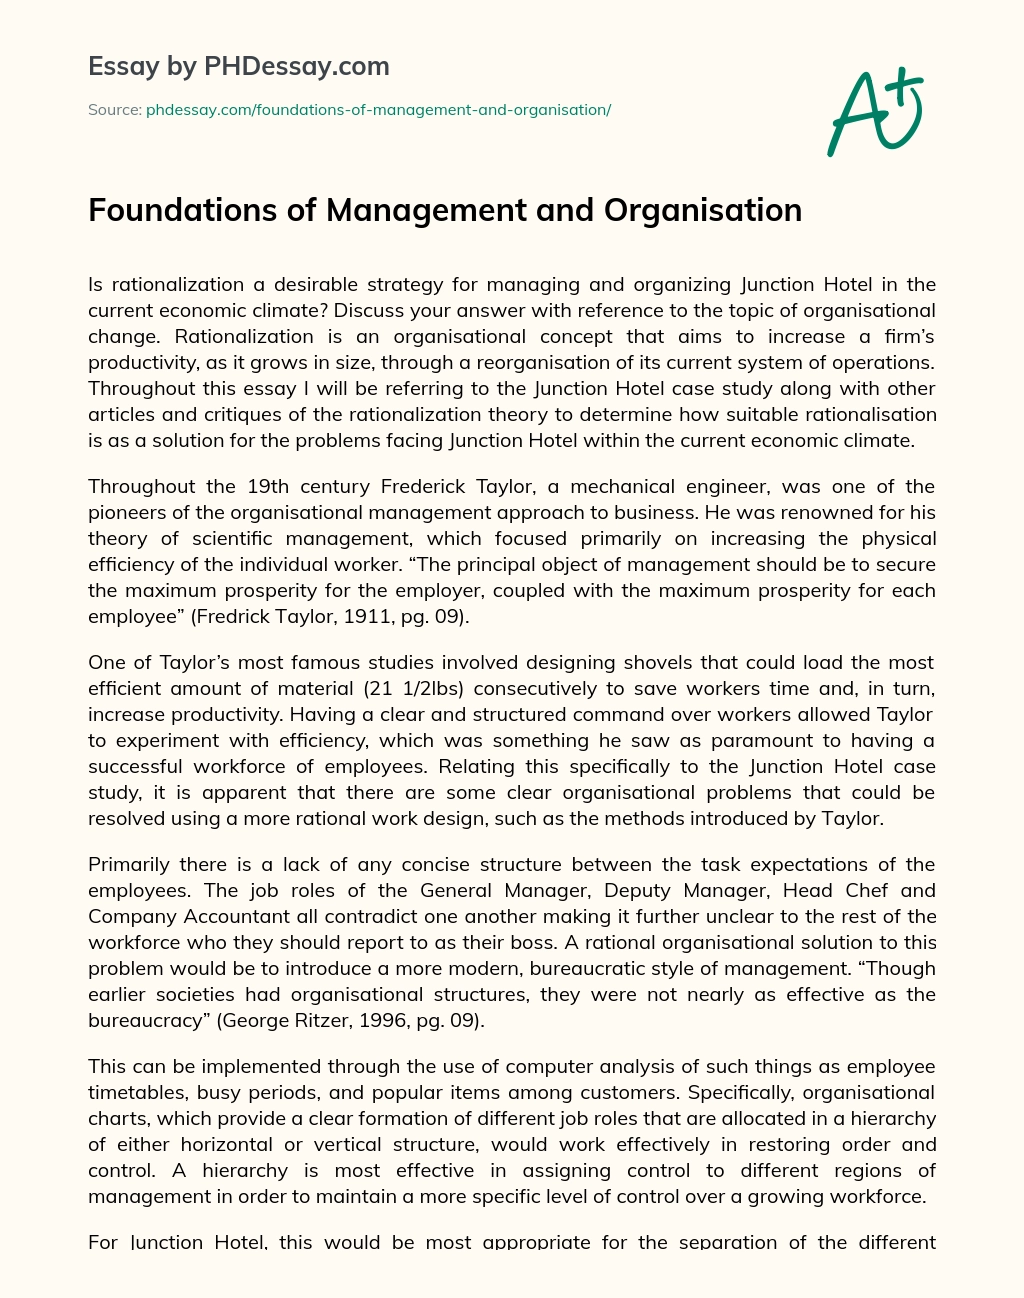 Foundations of Management and Organisation essay